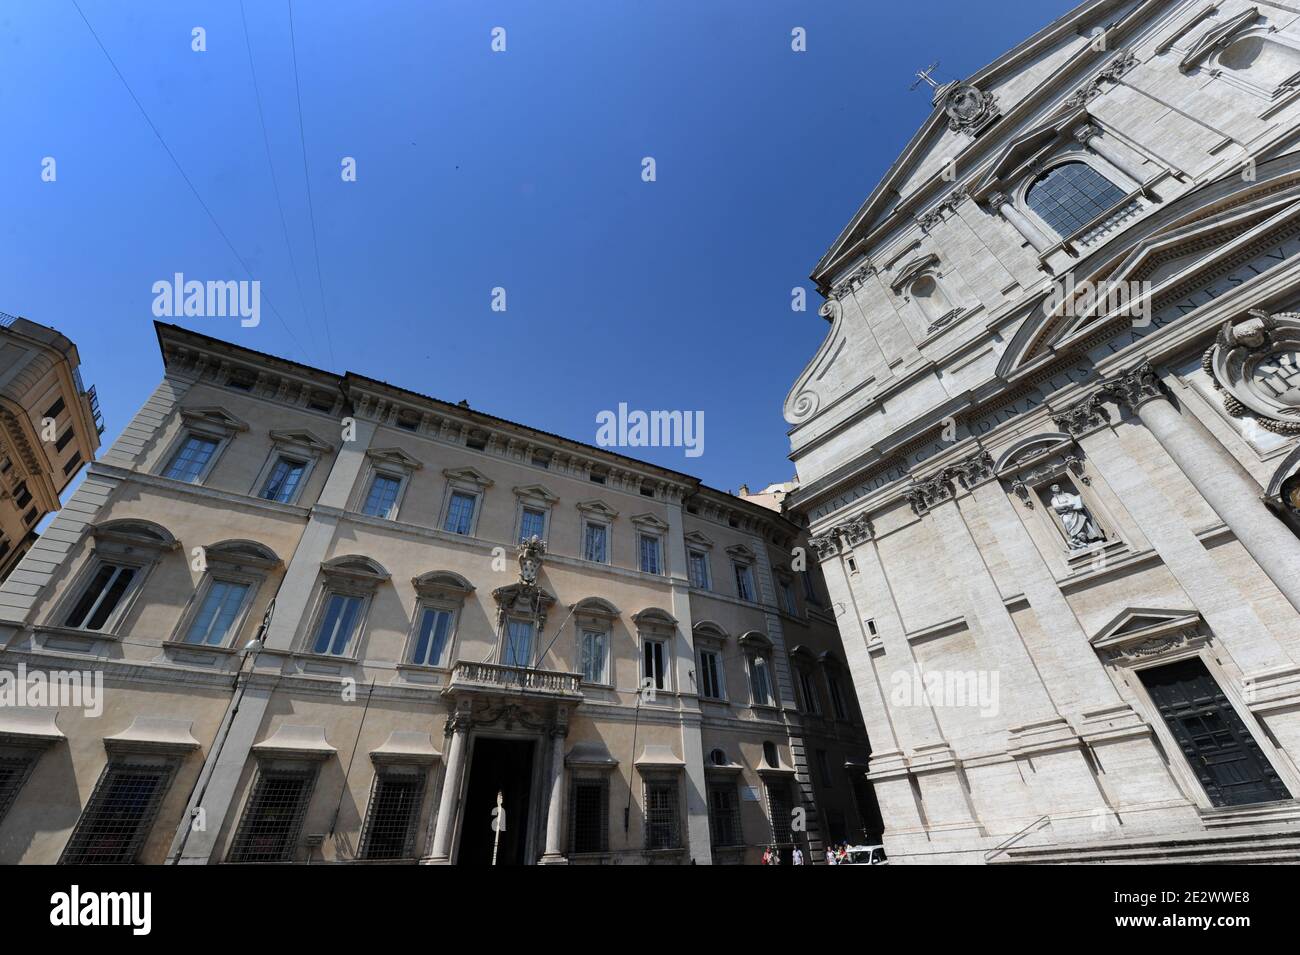 View of the Palazzo Altieri near the Church of the Gesu in Rome, Italy on June 25, 2010. Palazzo Altieri, which was the residence of one of the noblest families in the Middle Ages, is undoubtedly one of the finest palaces in Rome, due to its vastness and its large, richly decorated rooms. The Palace is the headquarters of the Italian Banking Association and is characterized by two architectural styles: the baroque and neoclassical. Photo by Eric Vandeville/ABACAPRESS.COM Stock Photo